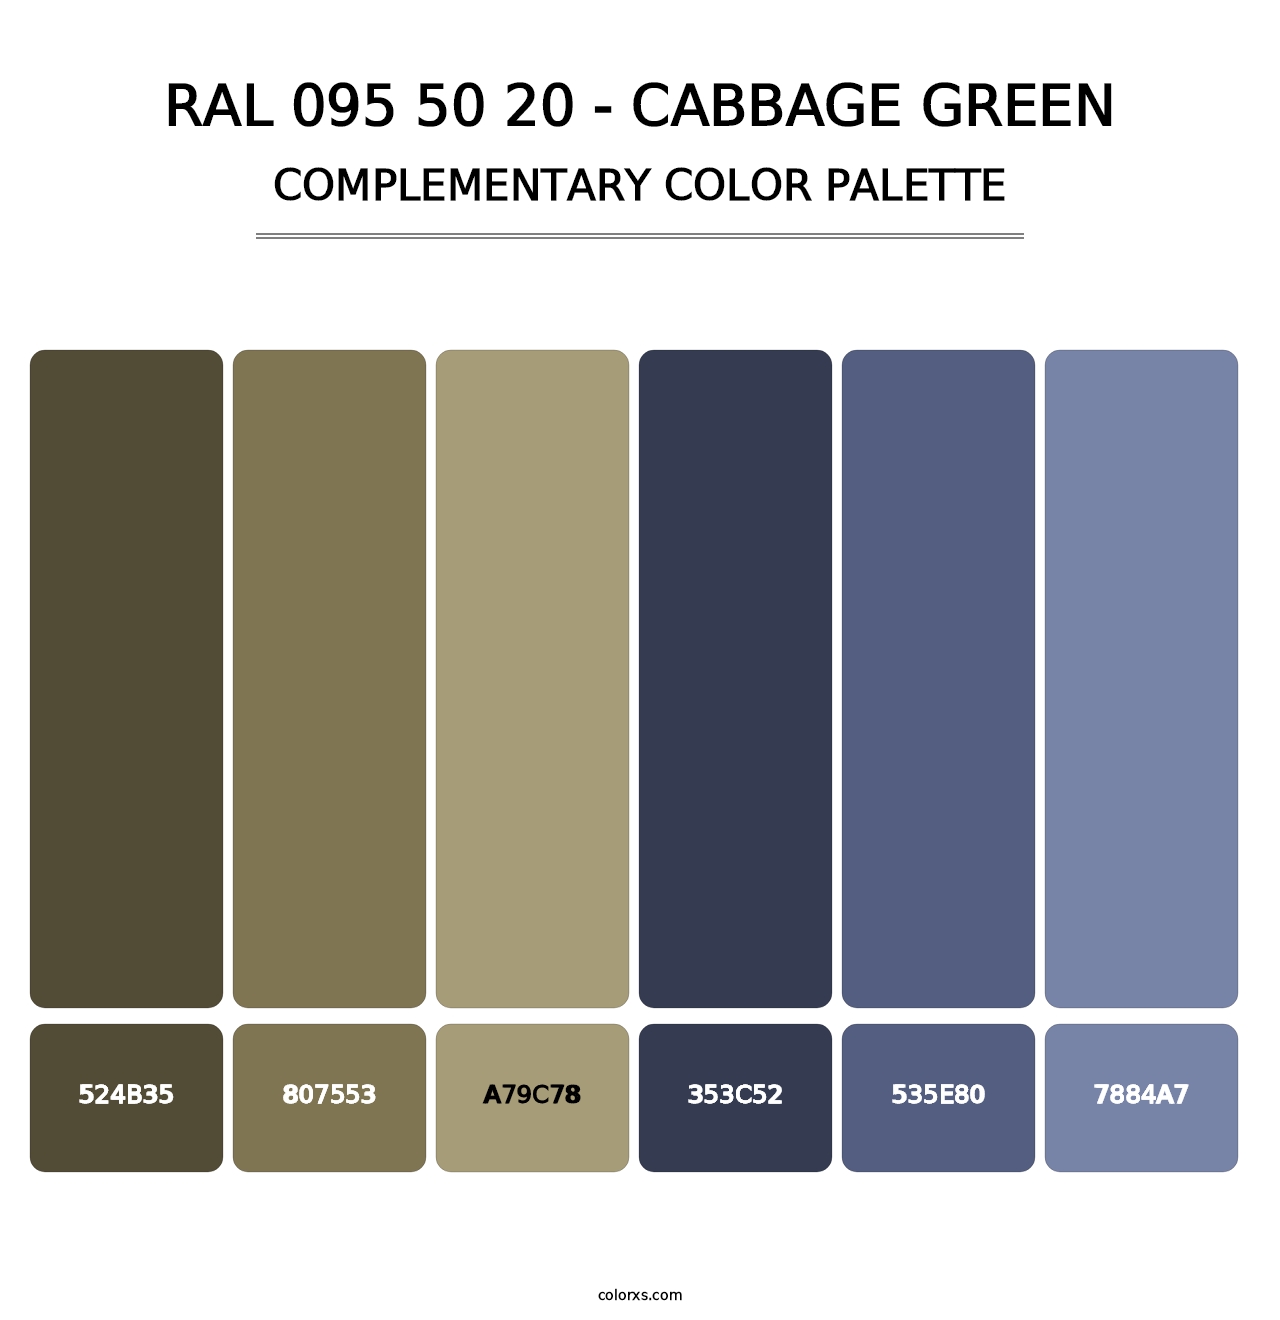 RAL 095 50 20 - Cabbage Green - Complementary Color Palette